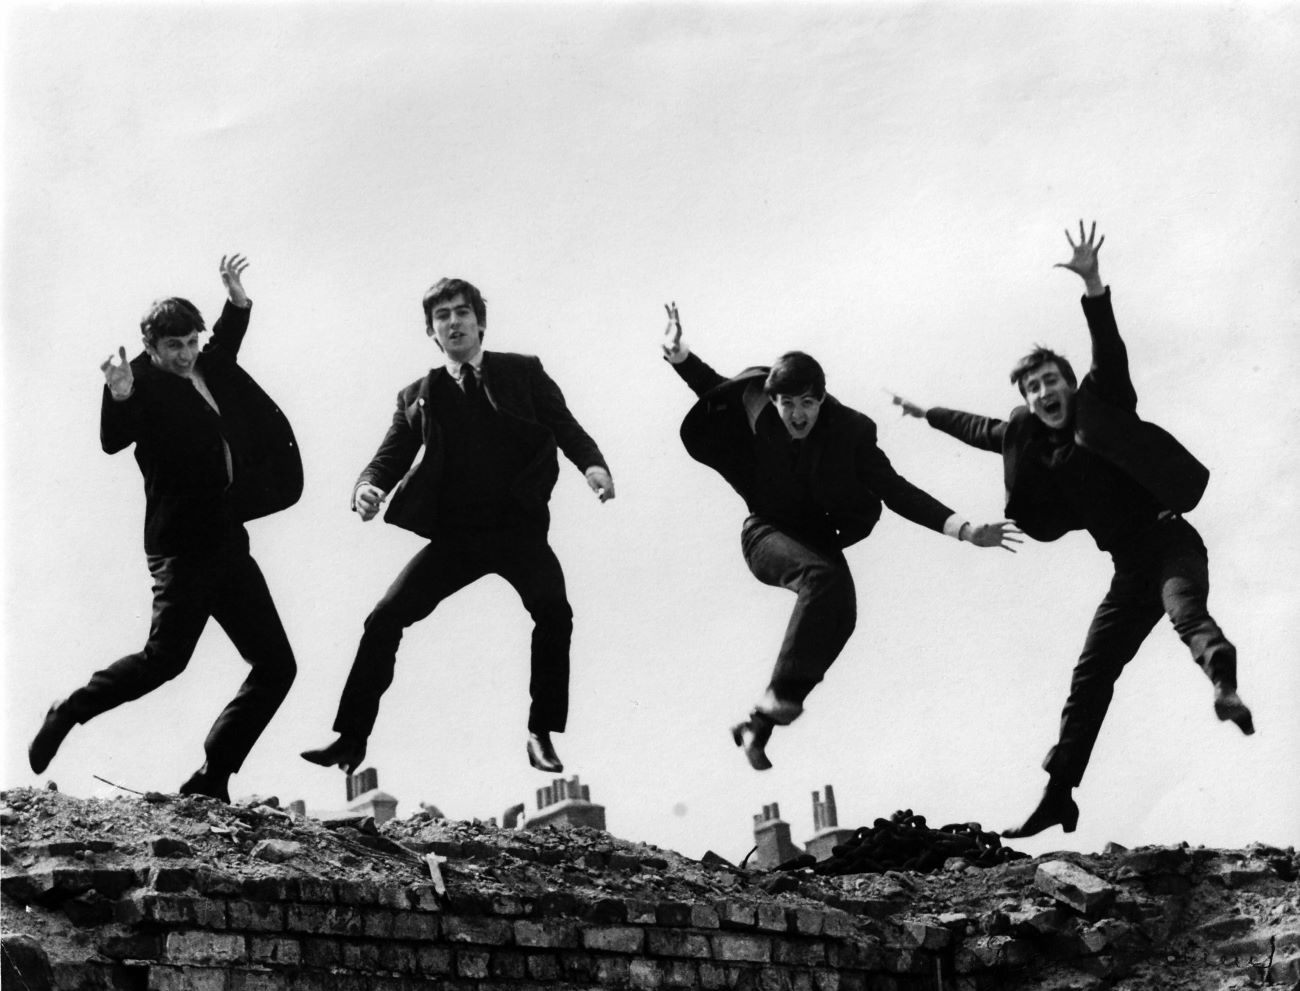 A black and white picture of The Beatles jumping up in the air.